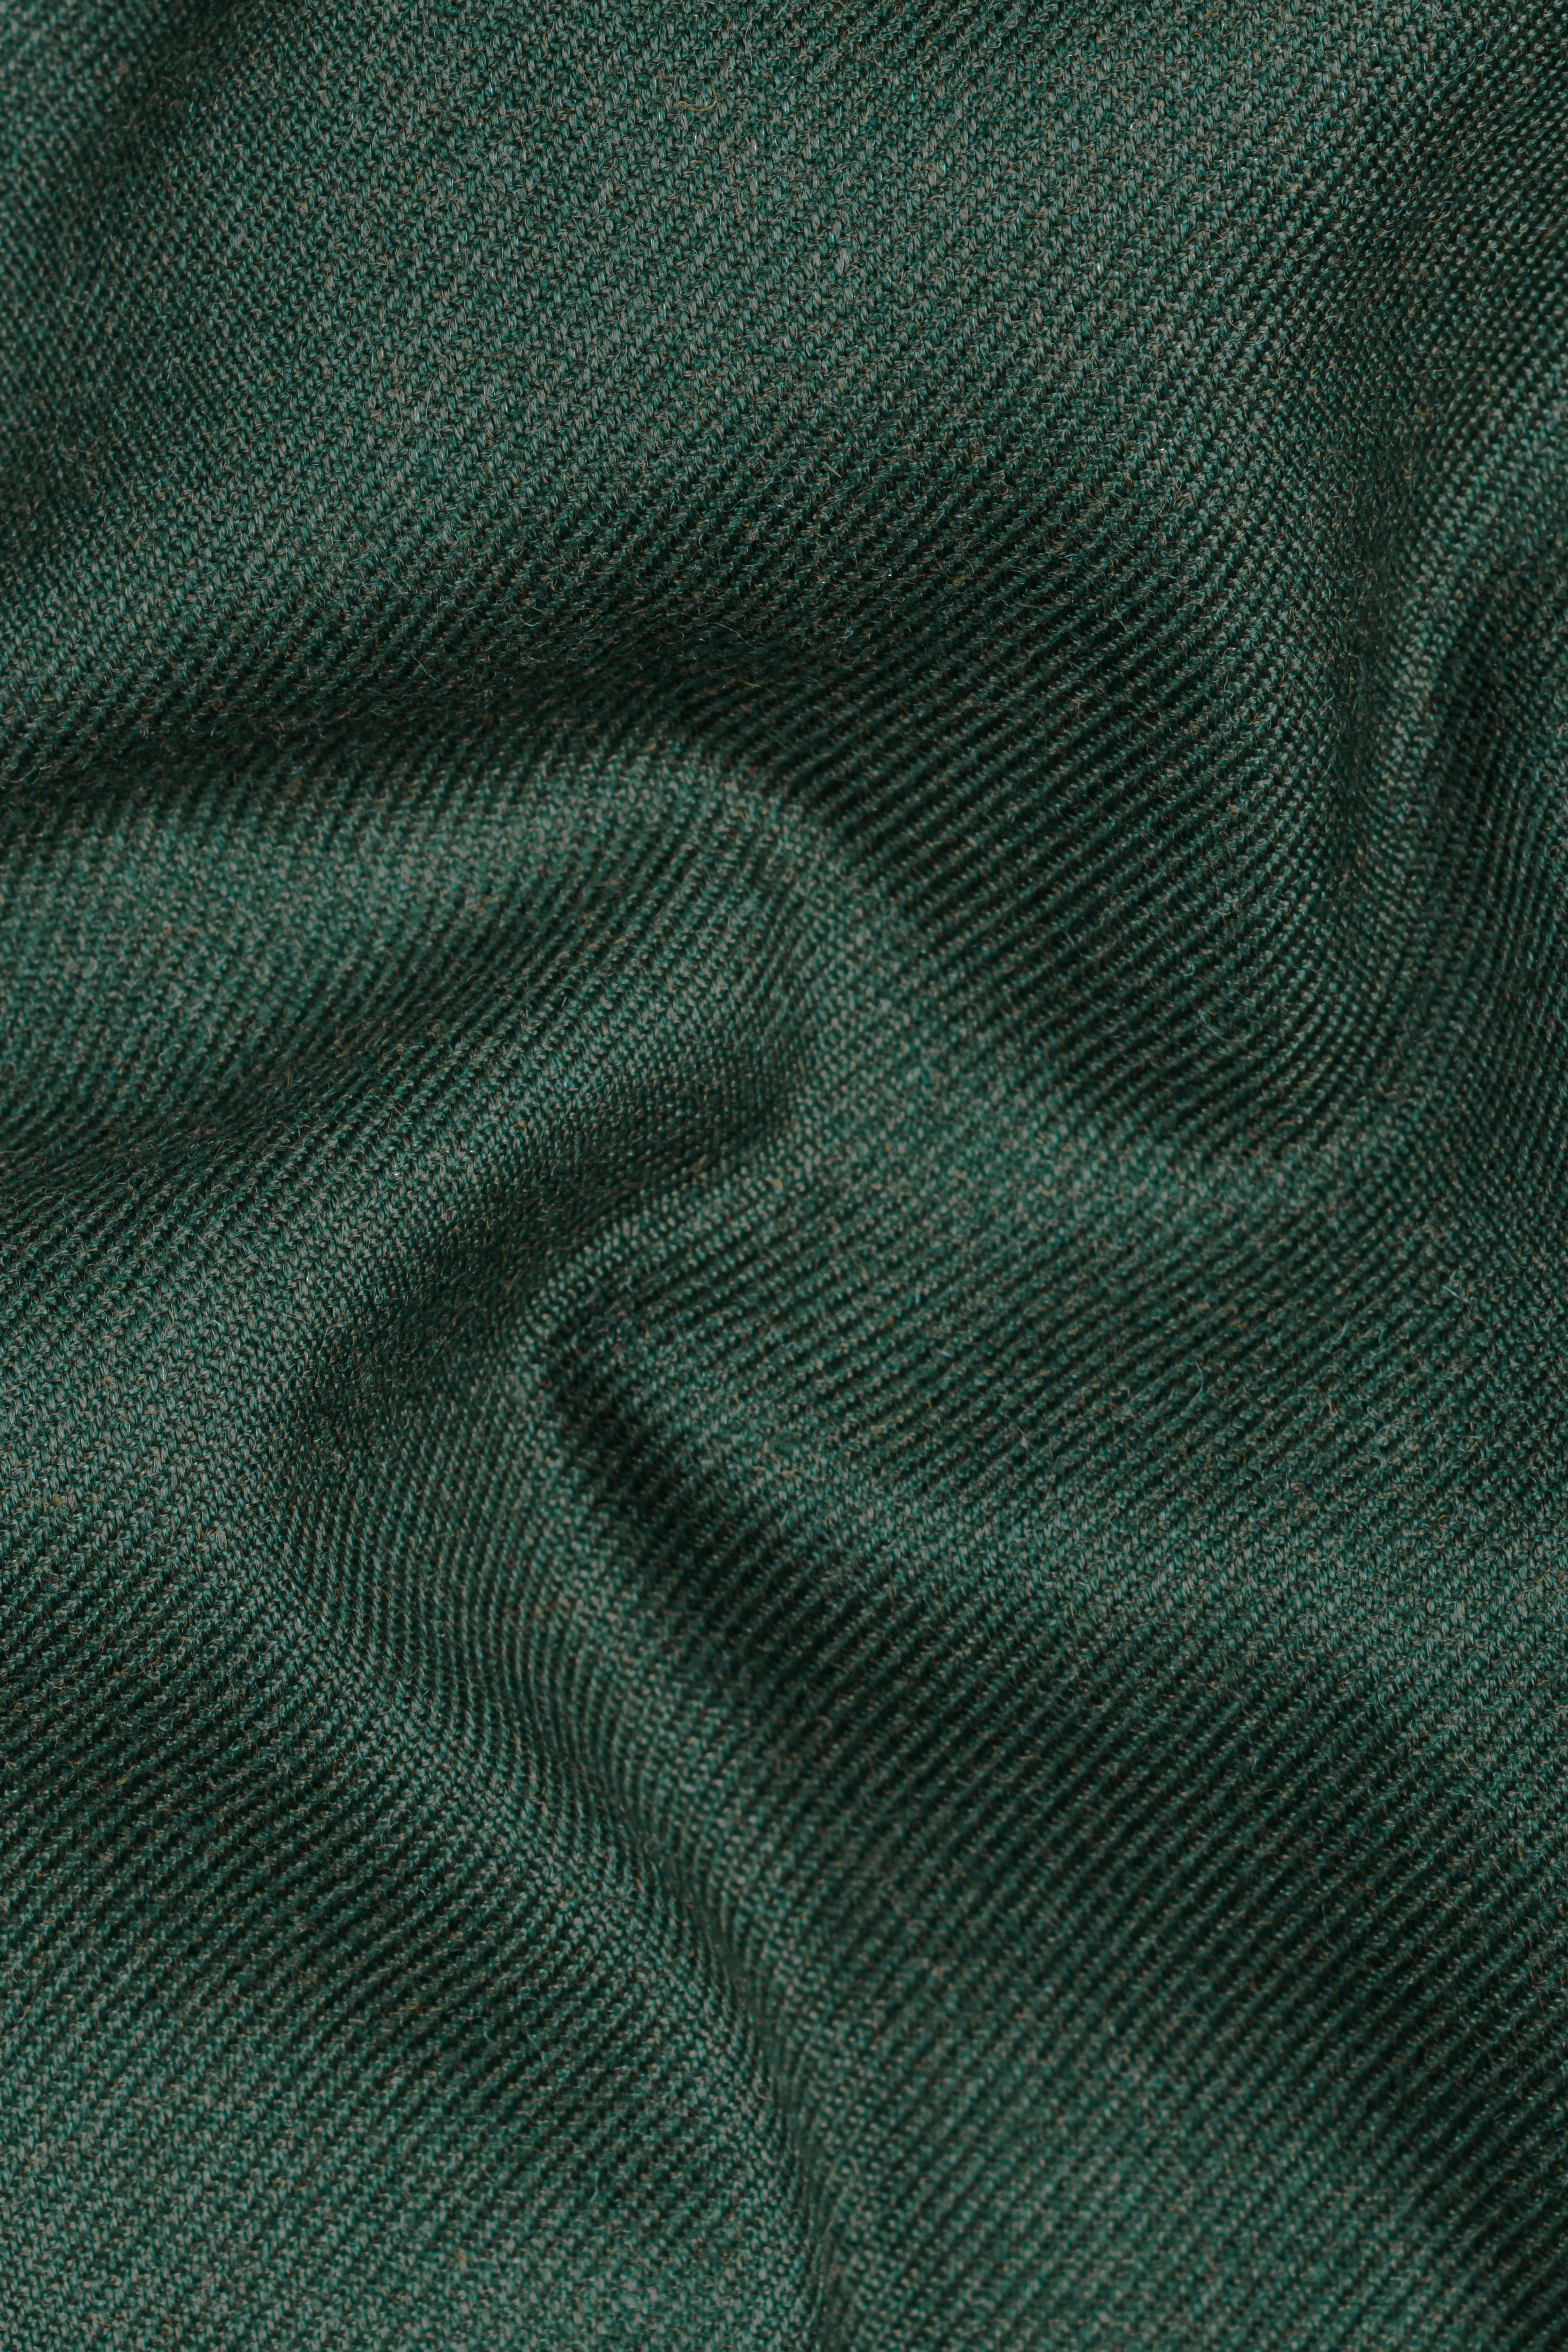 Plantation Green Tweed Double Breasted Suit